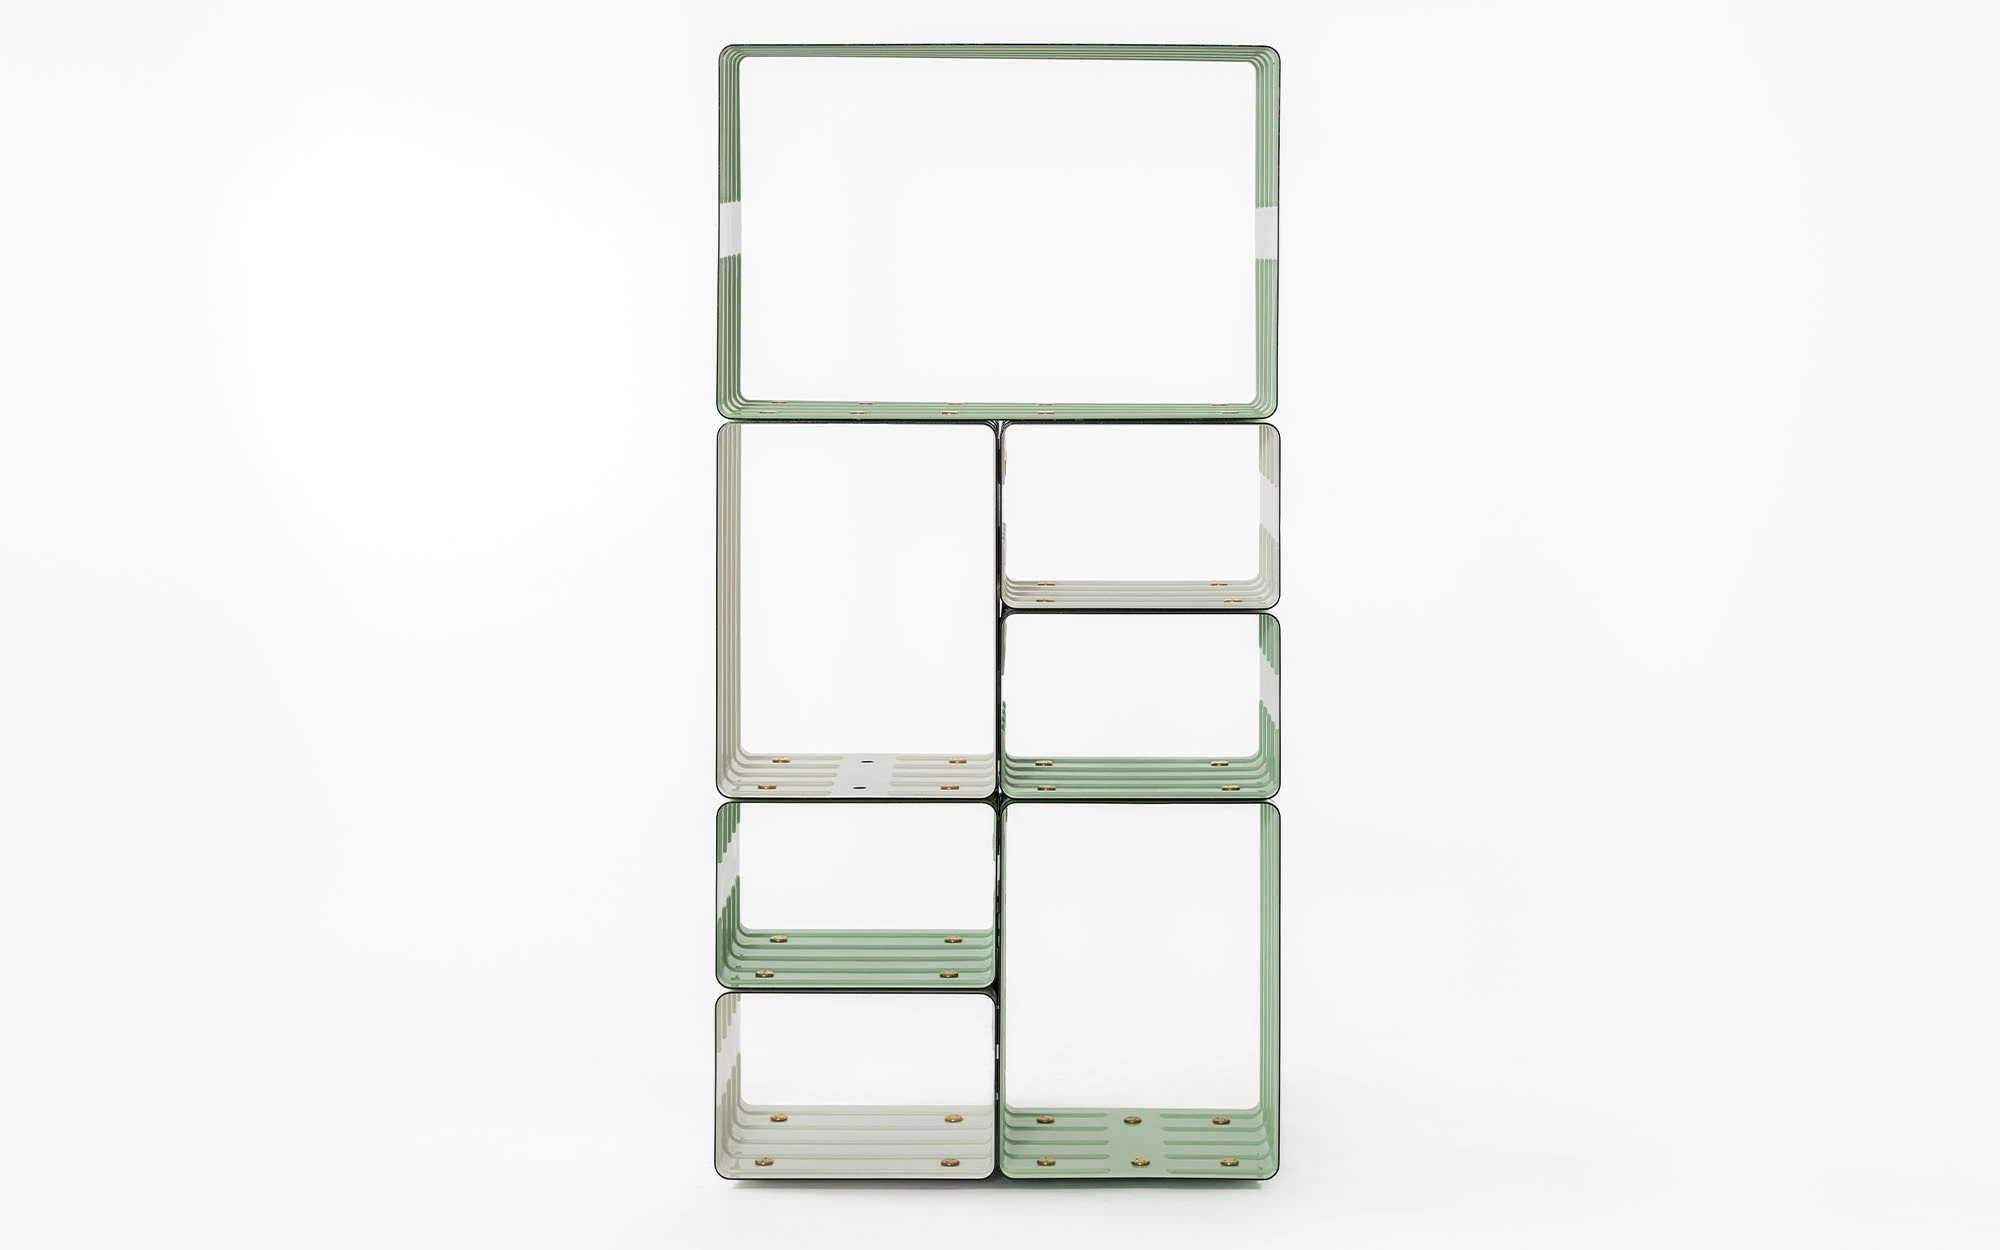 Quobus 1,2,4 two-colored - Marc Newson - Storage - Galerie kreo